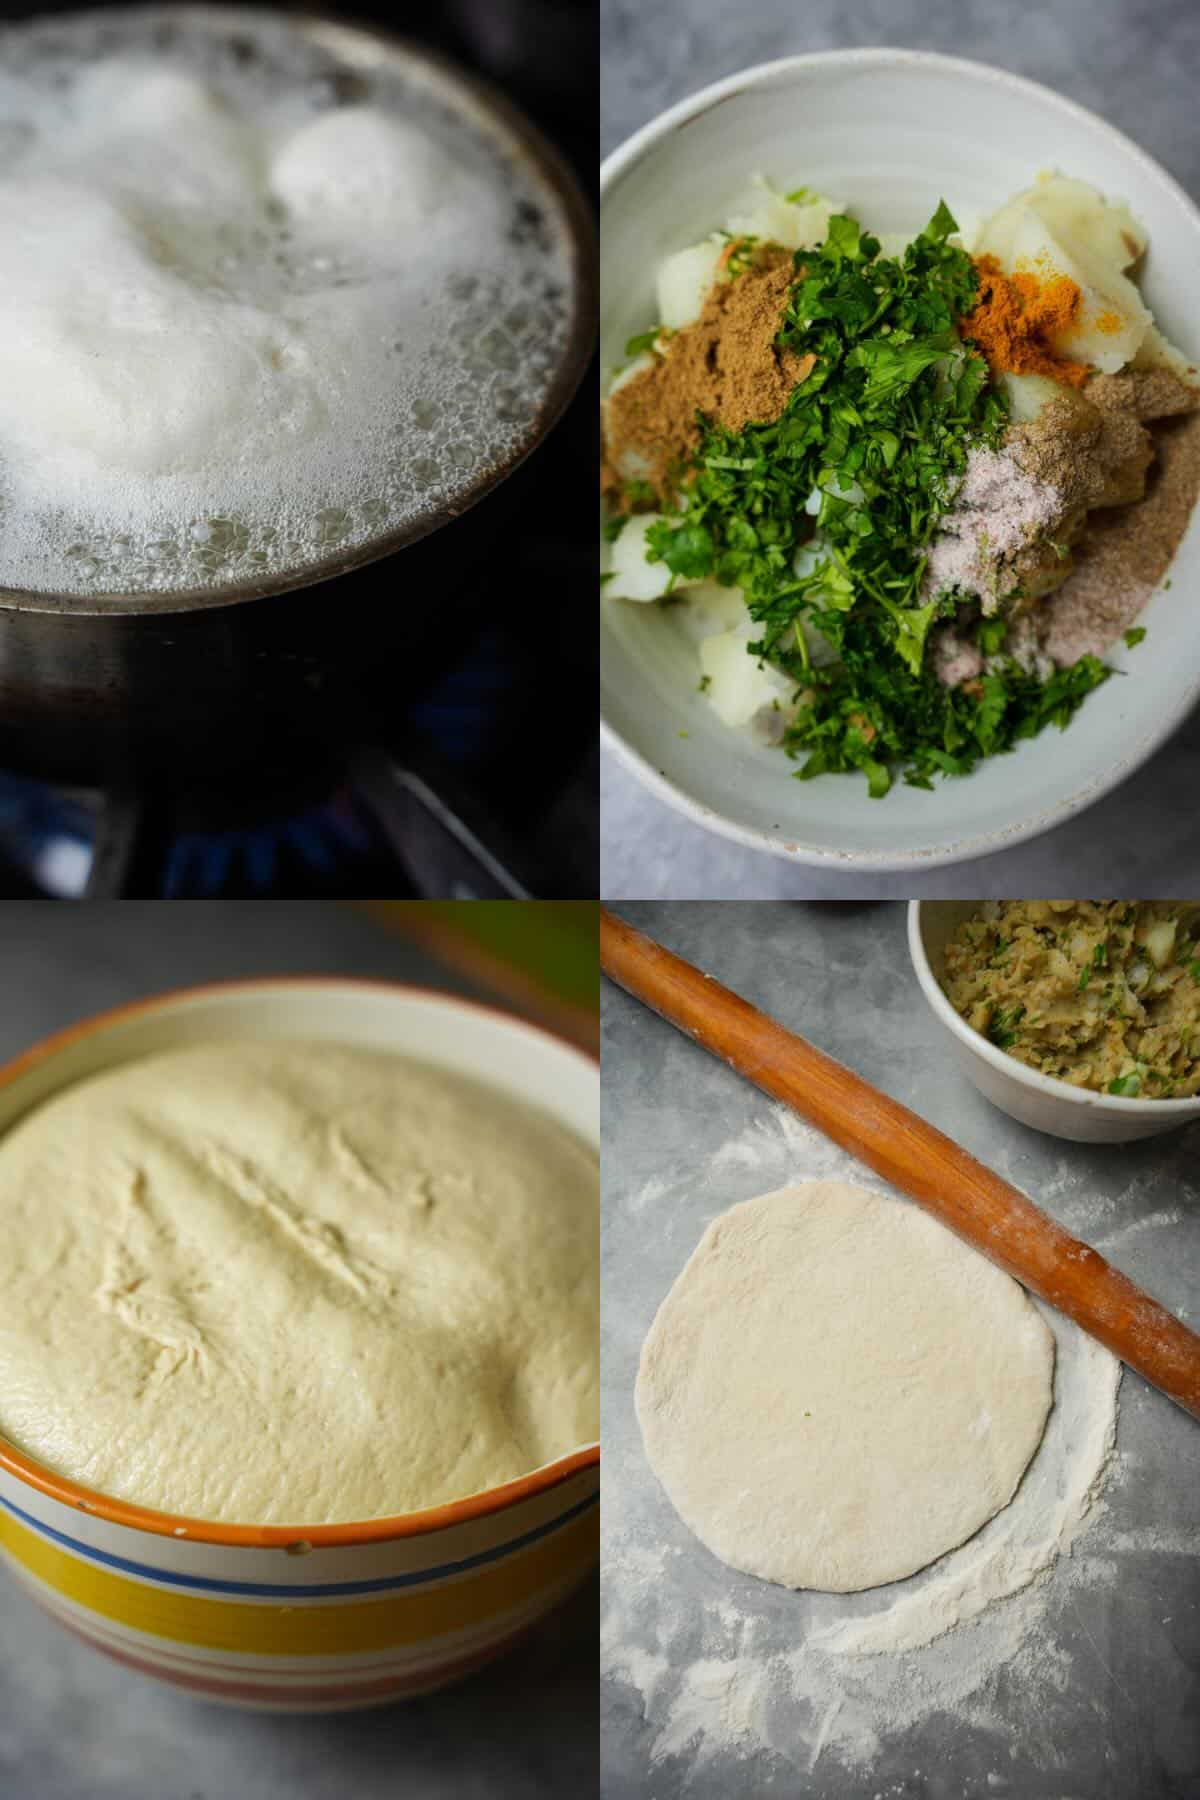 A collage of photos showing the process of making the filling and rolling out dough for Amritsari Kulcha, a delicious variation of naan bread.